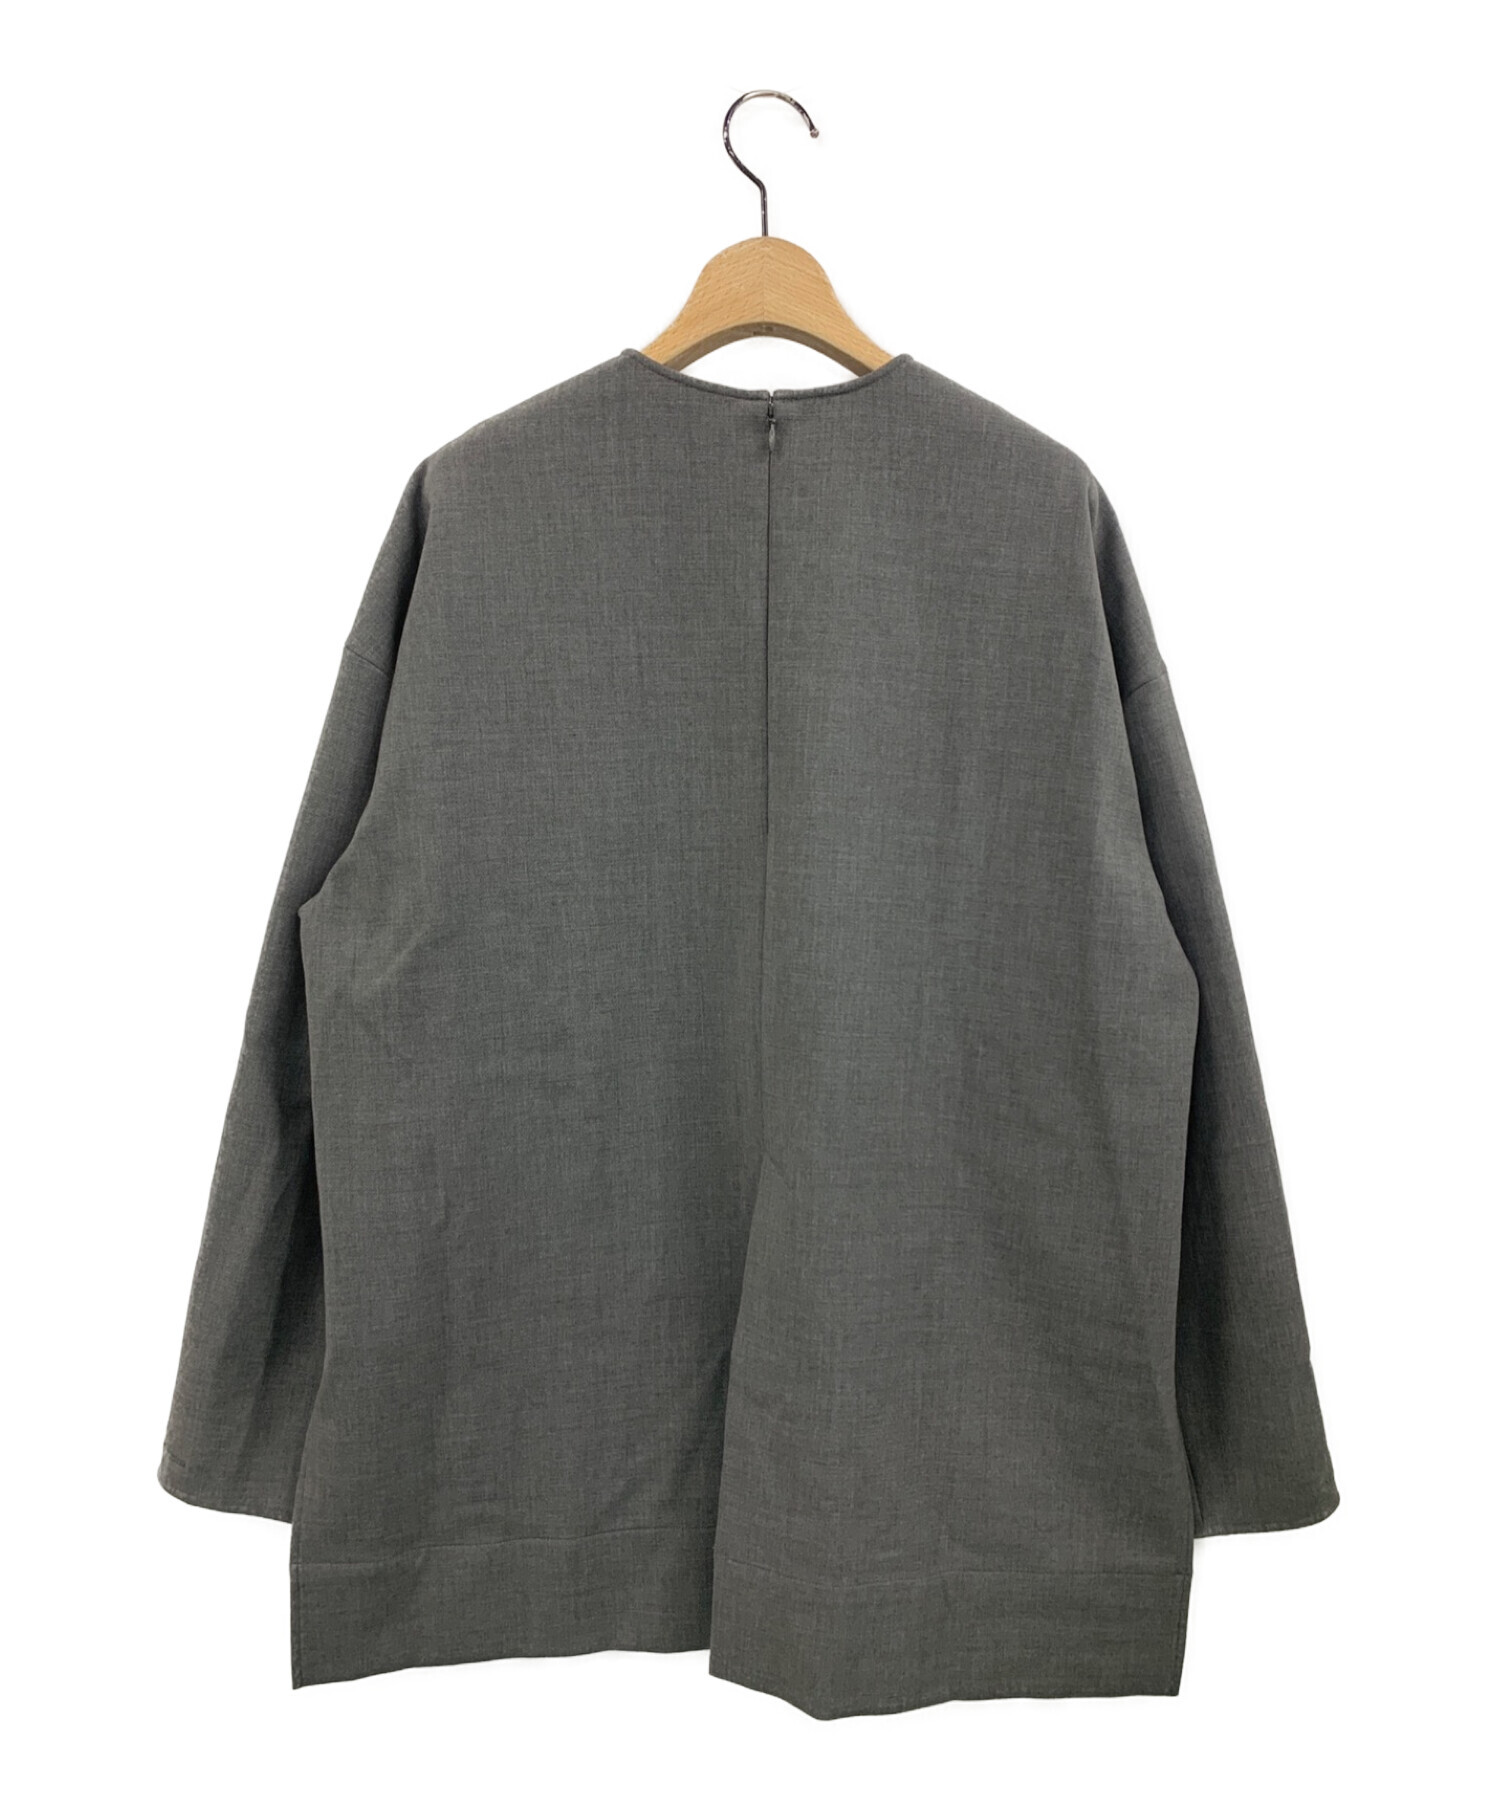 ENFOLD】TWO-WAY-SLEEVE PULLOVER - トップス